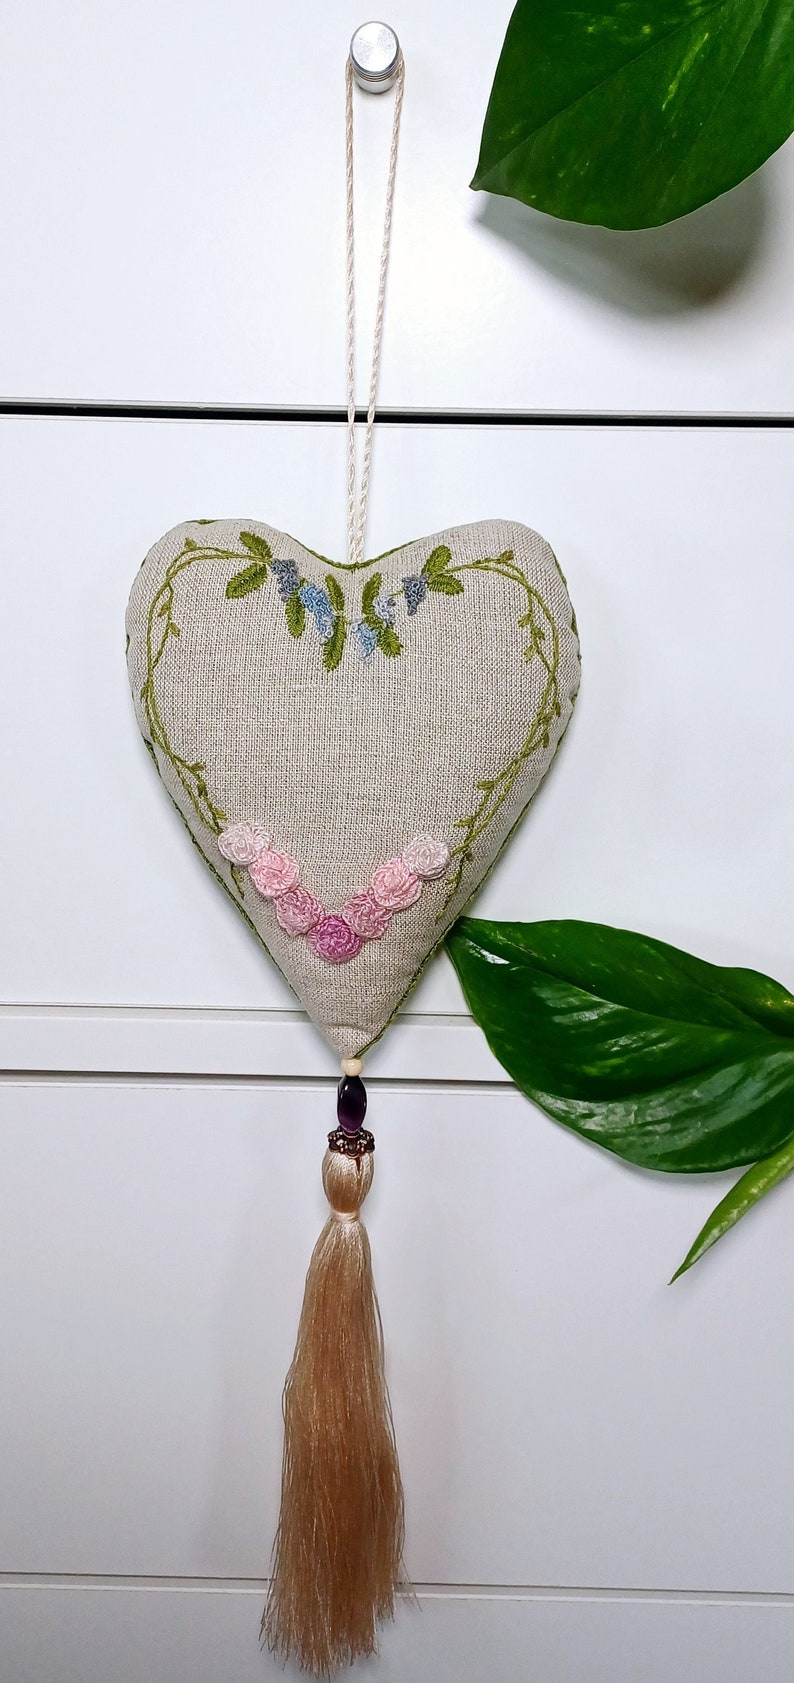 Hand embroidered linen sachet with tassel and hanging loop filled with lavender hanged on drawer knob